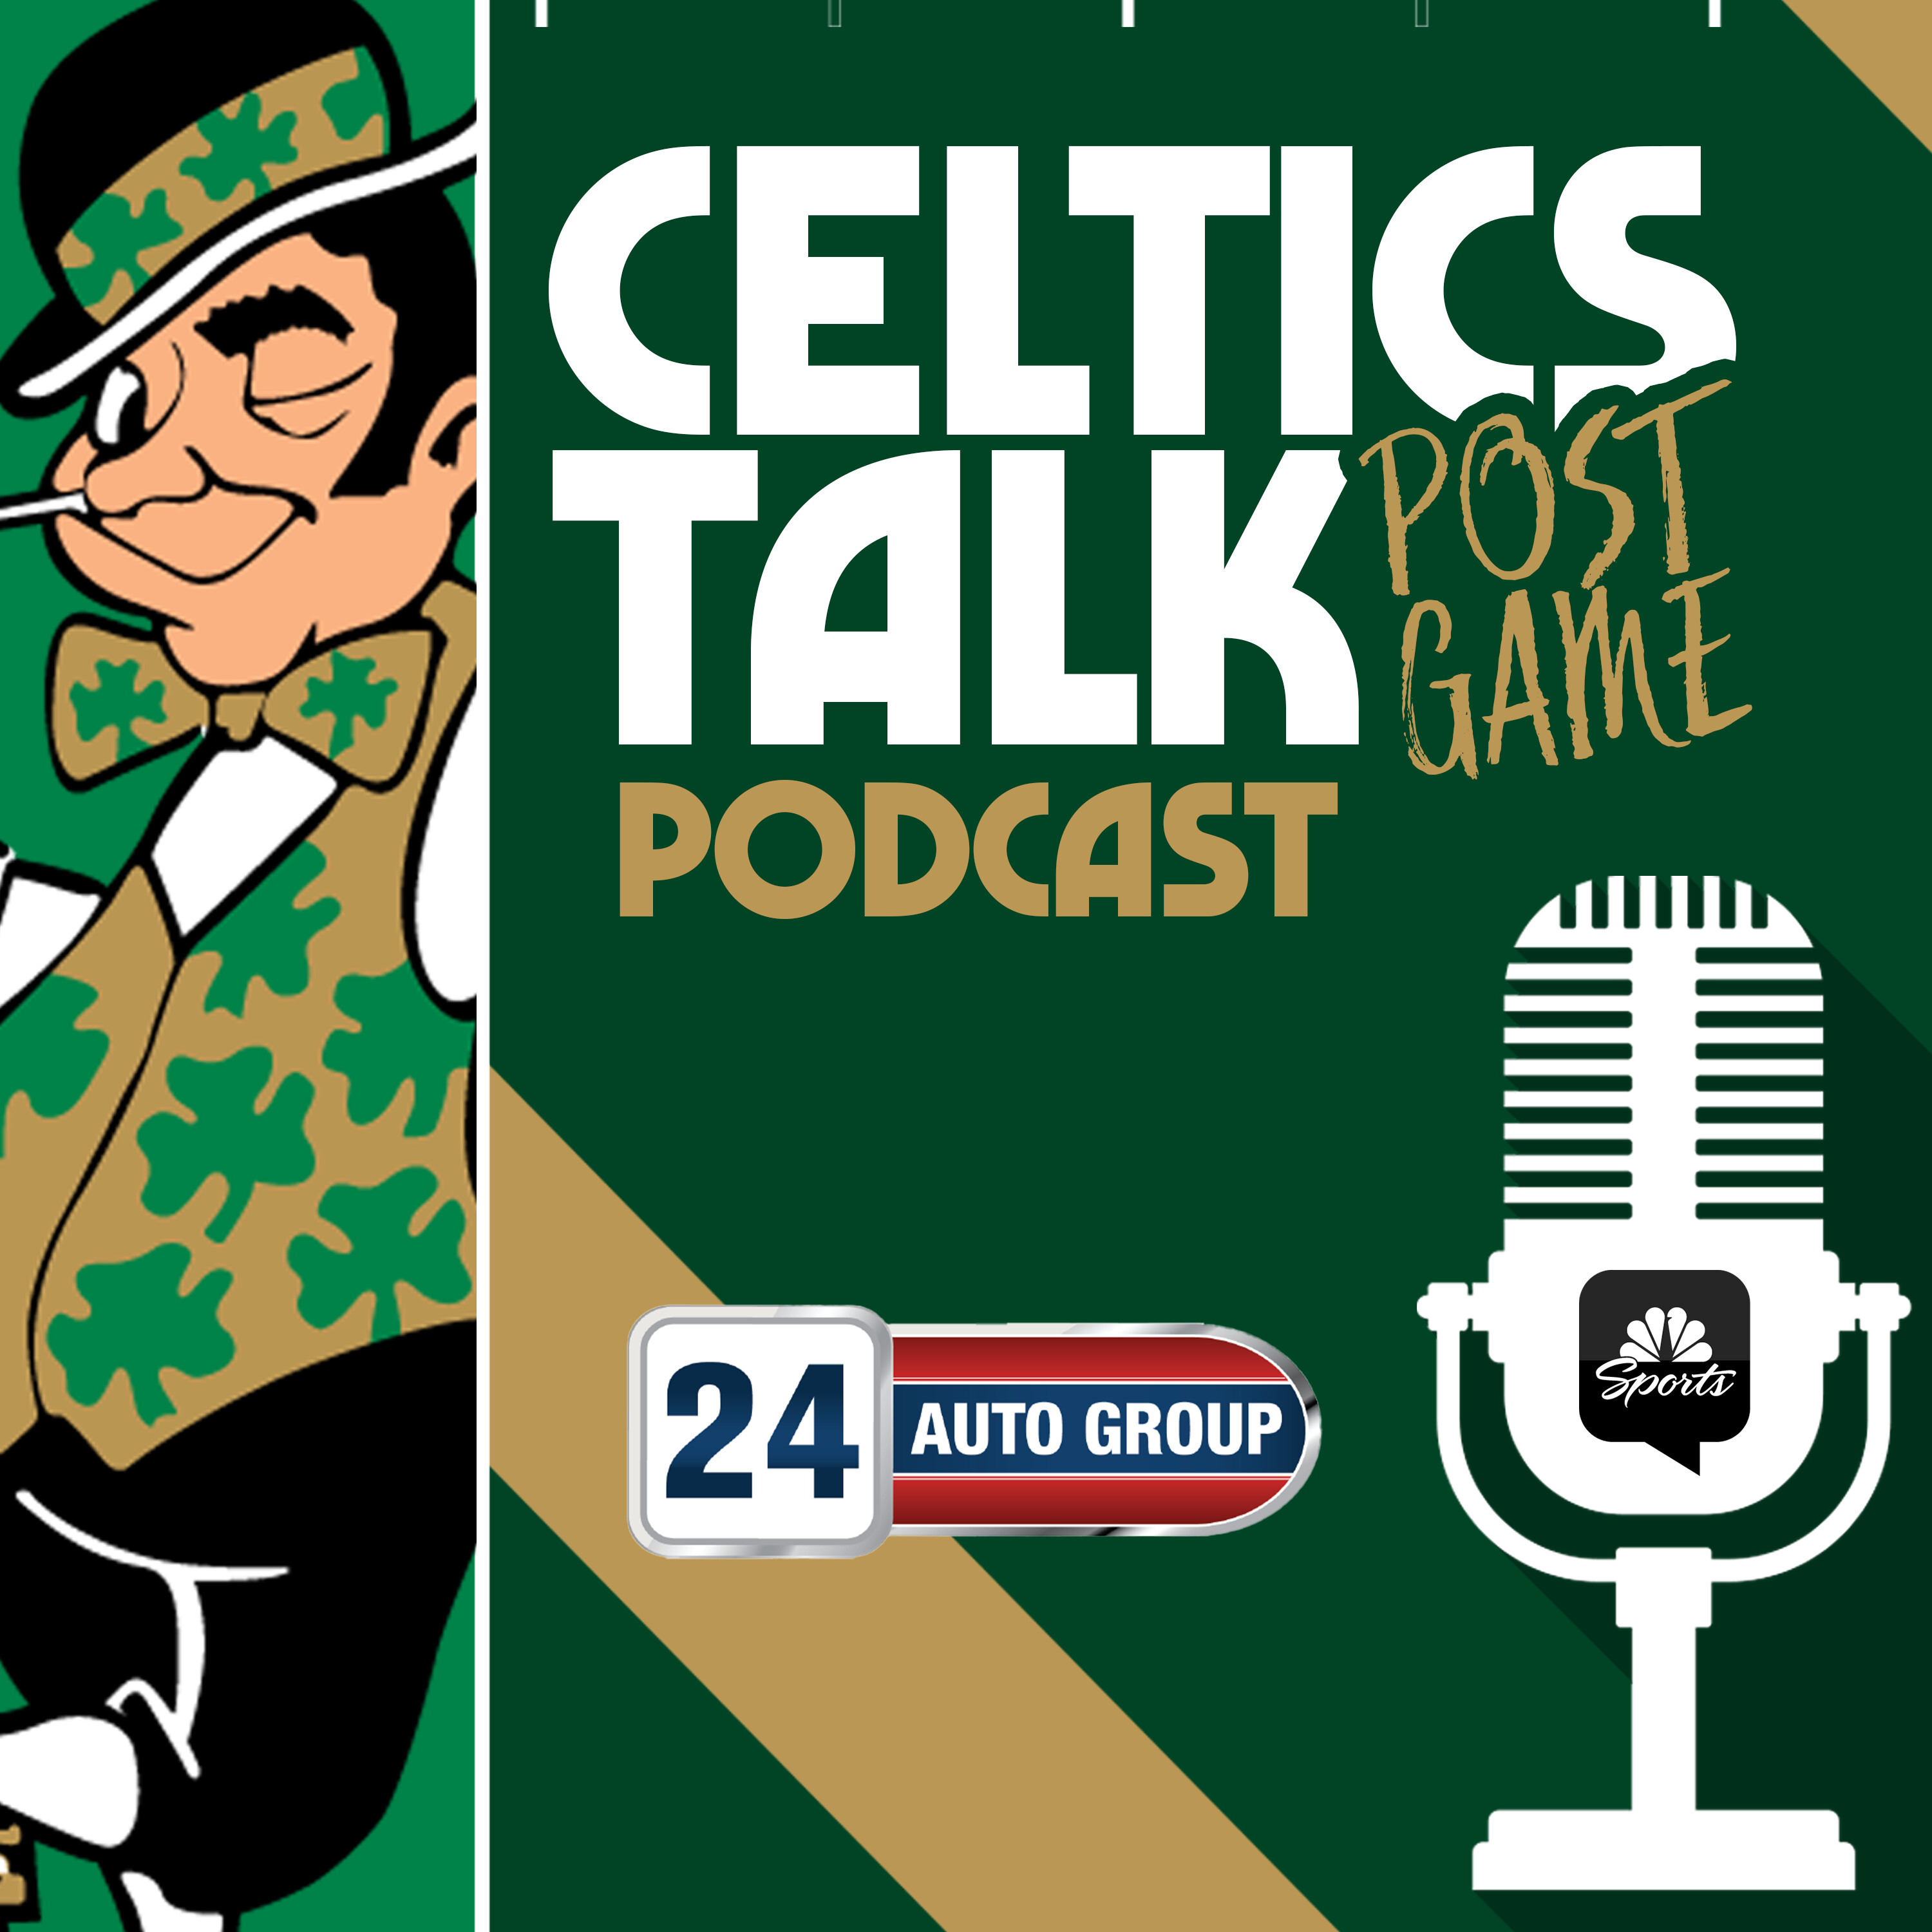 POSTGAME POD: MASK’S OFF... Celtics bounce back to take commanding 3-1 series lead